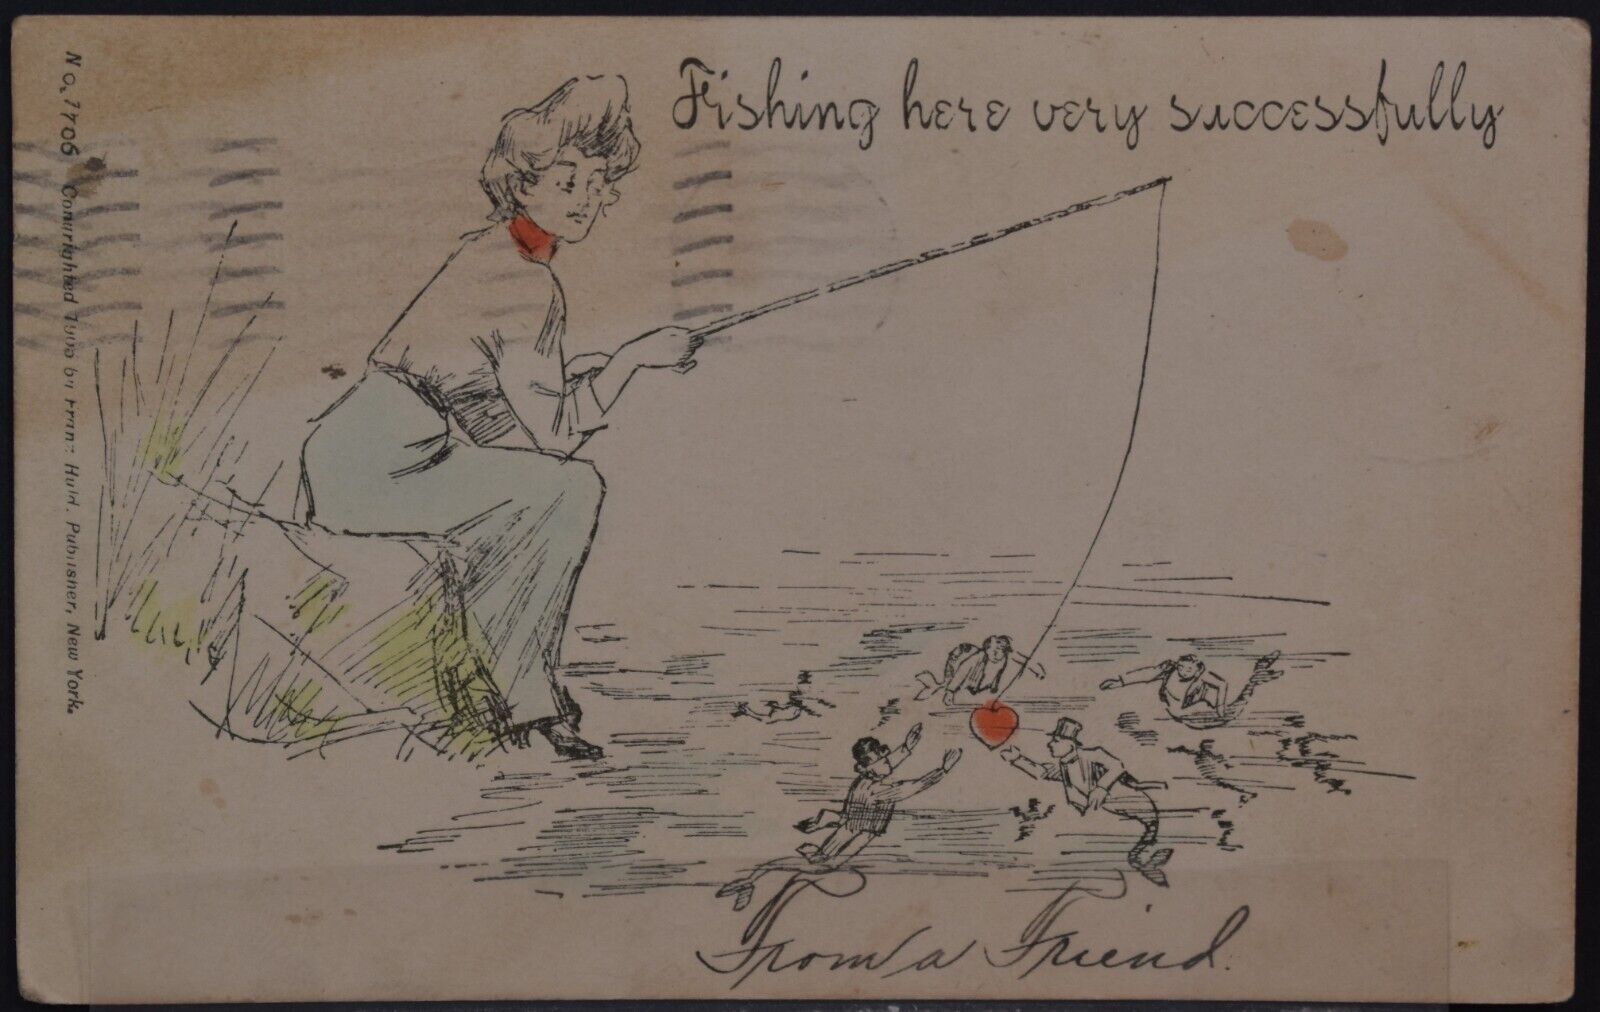 Fishing Here Very Successfully - 1905